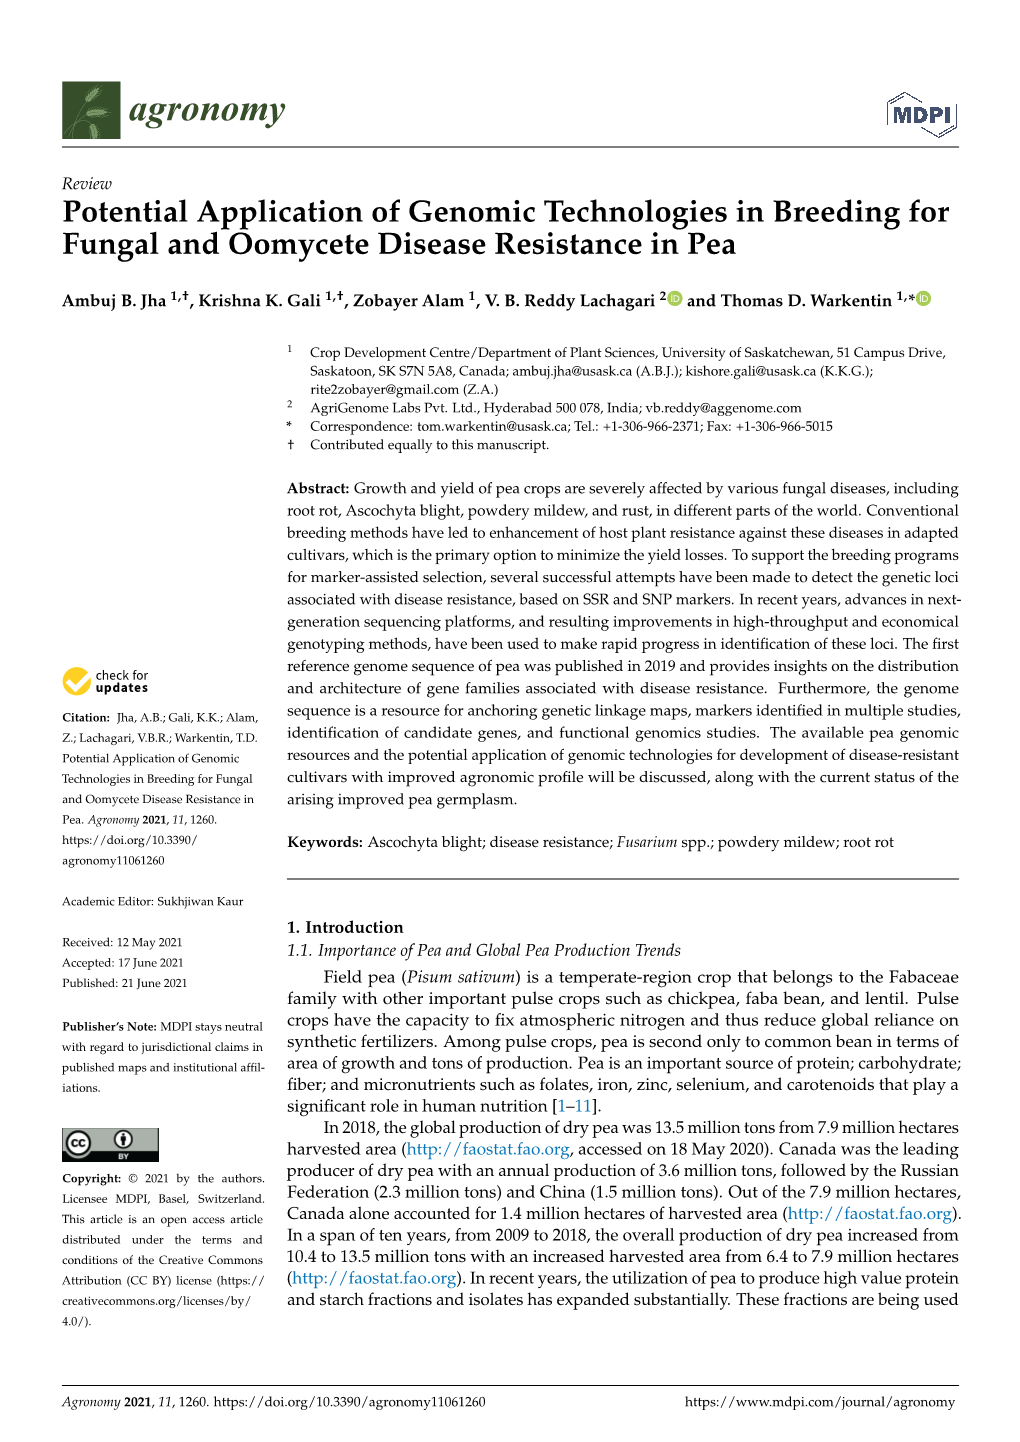 Potential Application of Genomic Technologies in Breeding for Fungal and Oomycete Disease Resistance in Pea